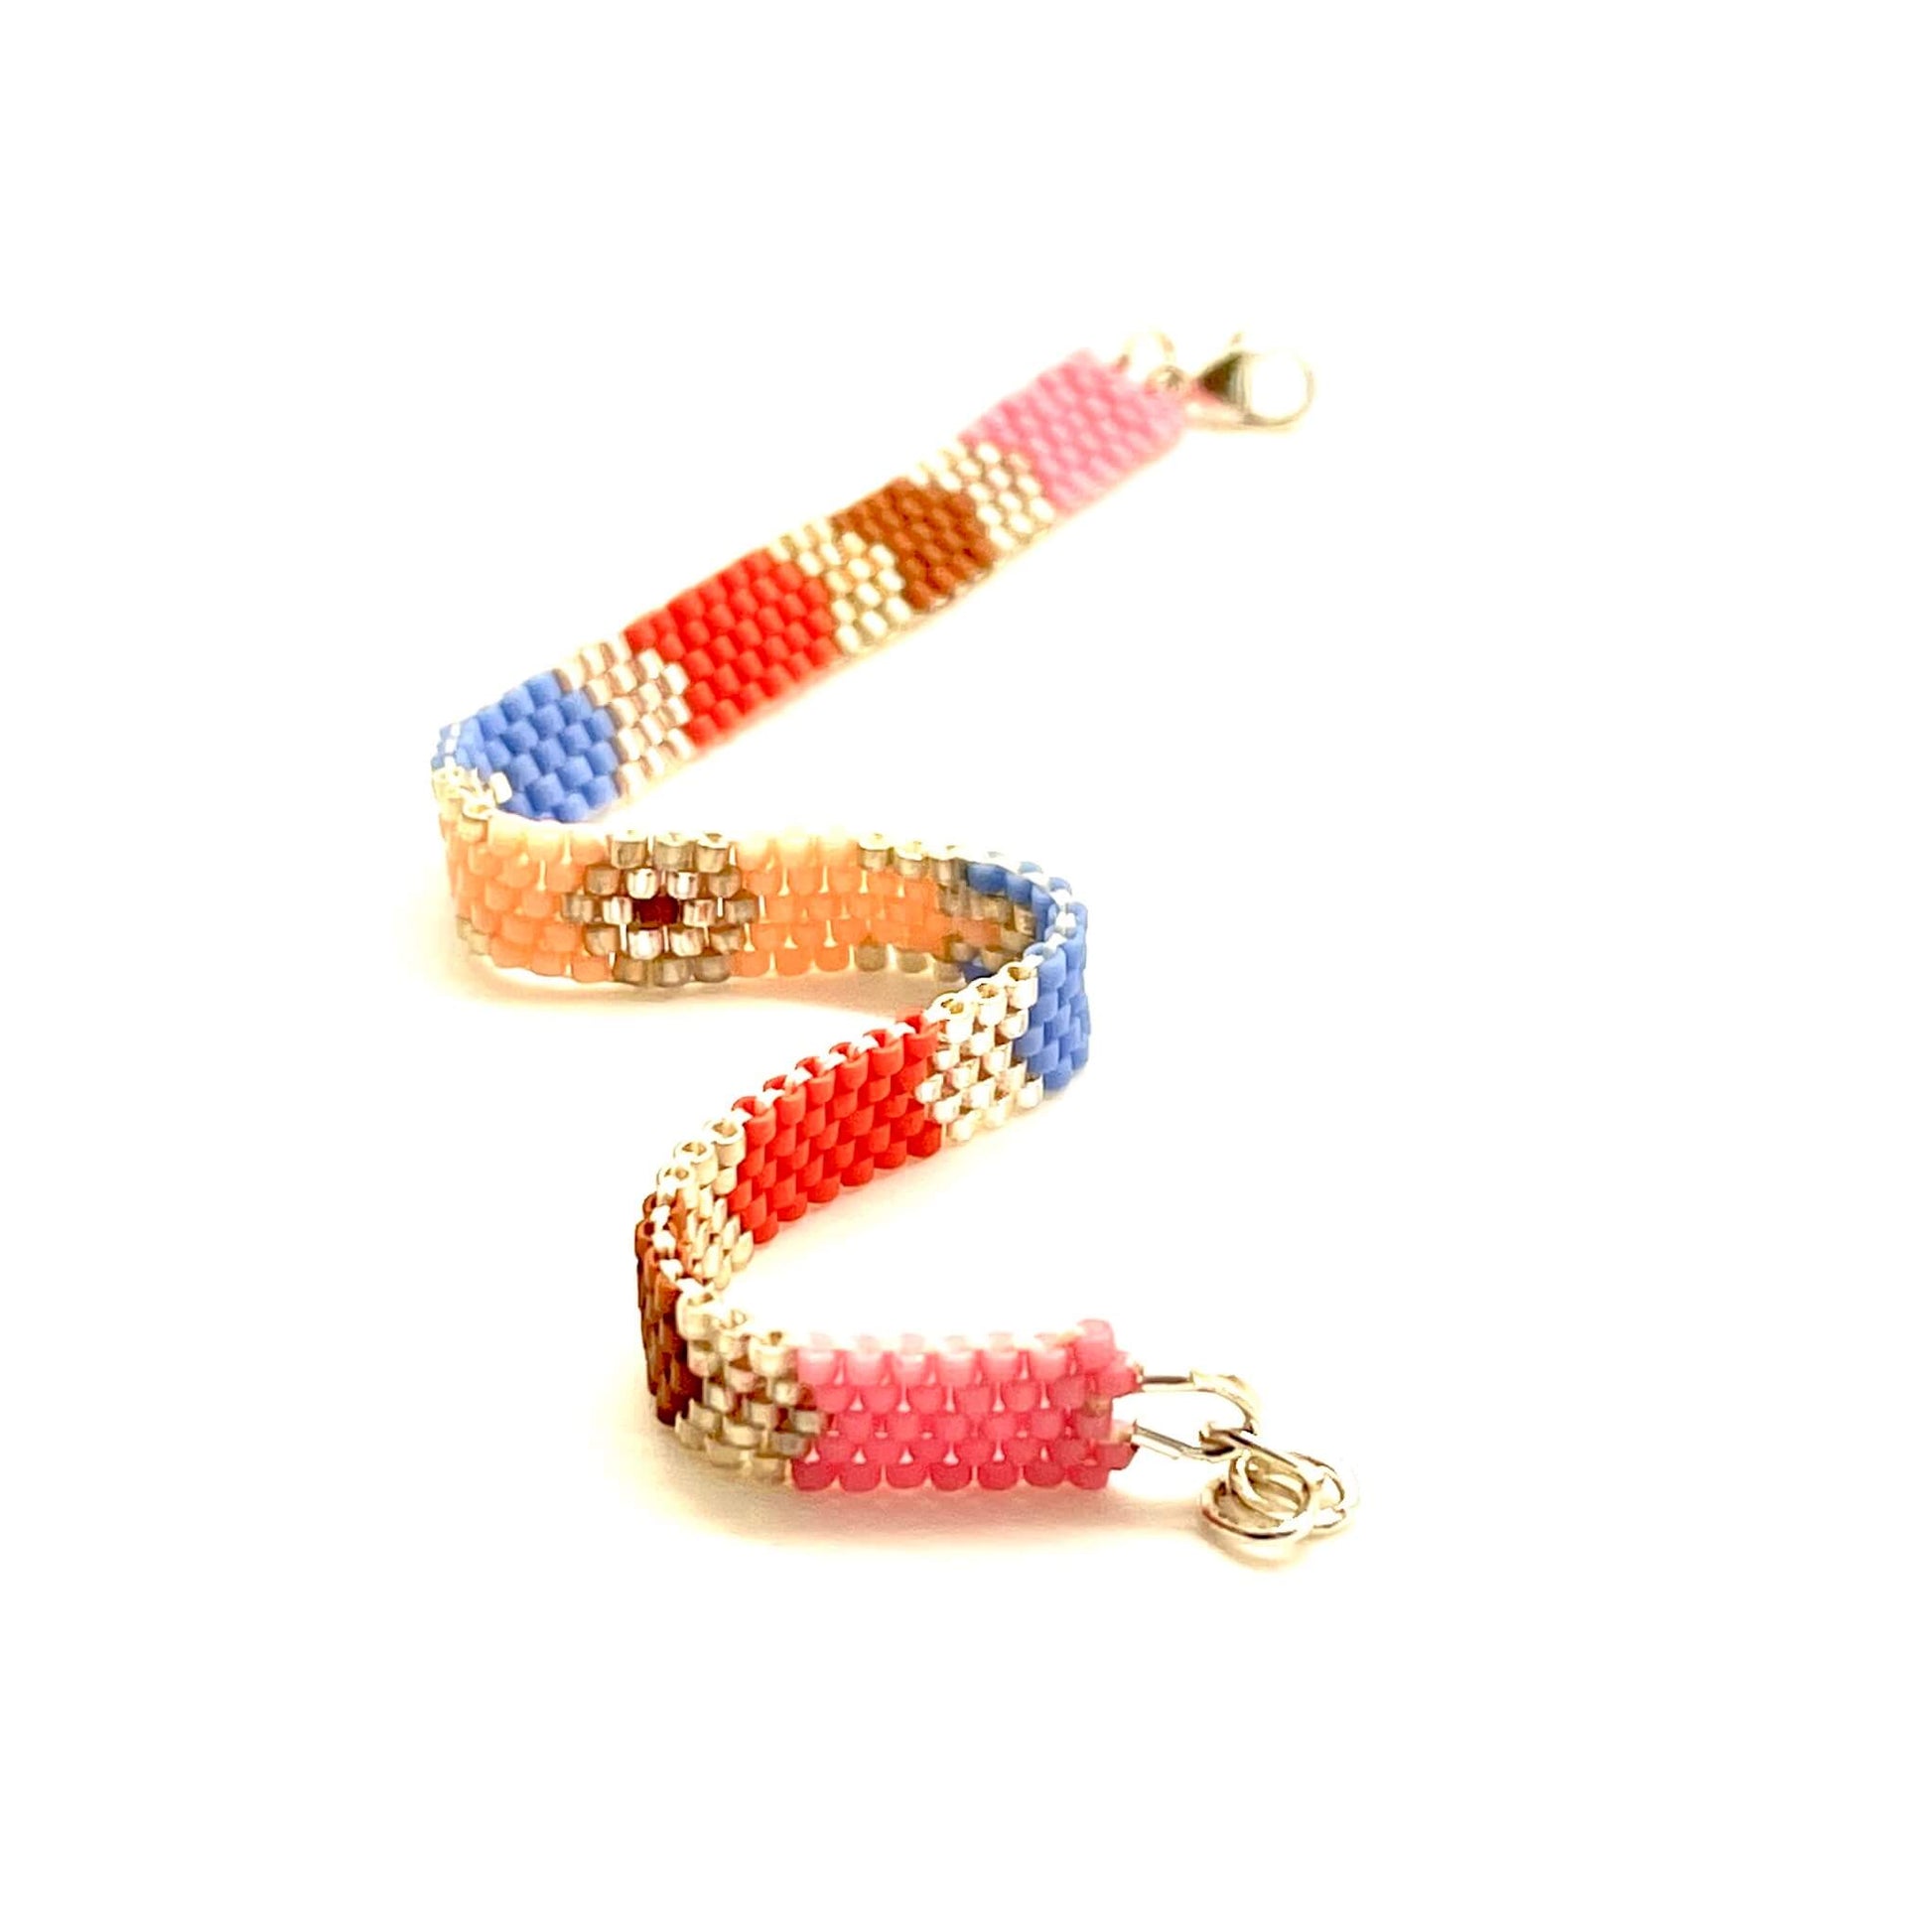 Peach, red, and blue peyote beaded bracelet with gold accents.